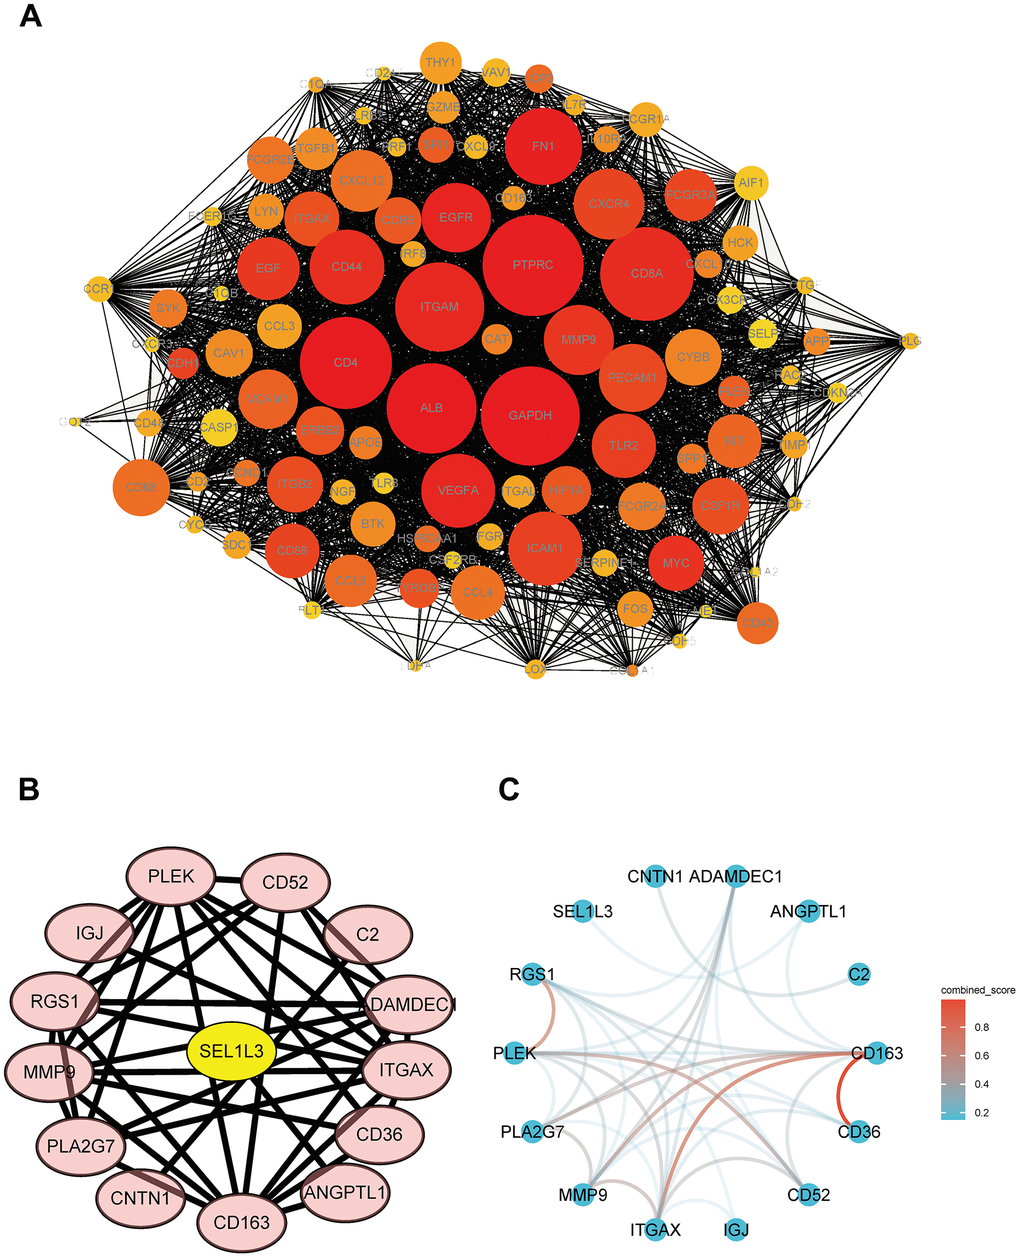 PPI network of DEGs and hub genes. (A) Total DEGs. (B) Protein interaction relationship by Cytoscape. (C) Protein interaction network colored by combine score.